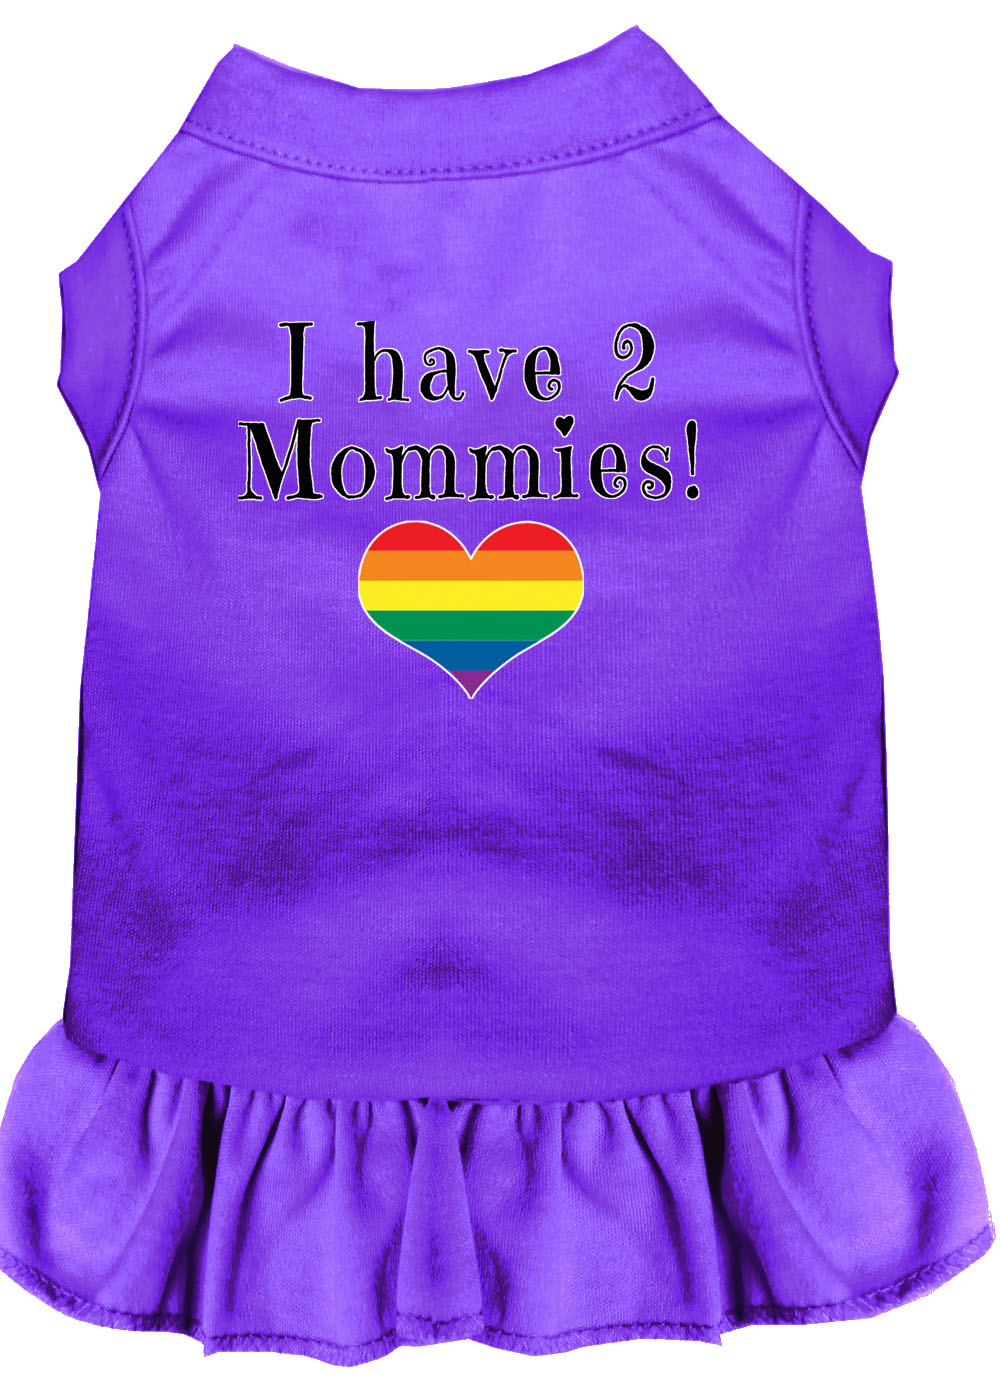 I Have 2 Mommies Screen Print Dog Dress Purple Med